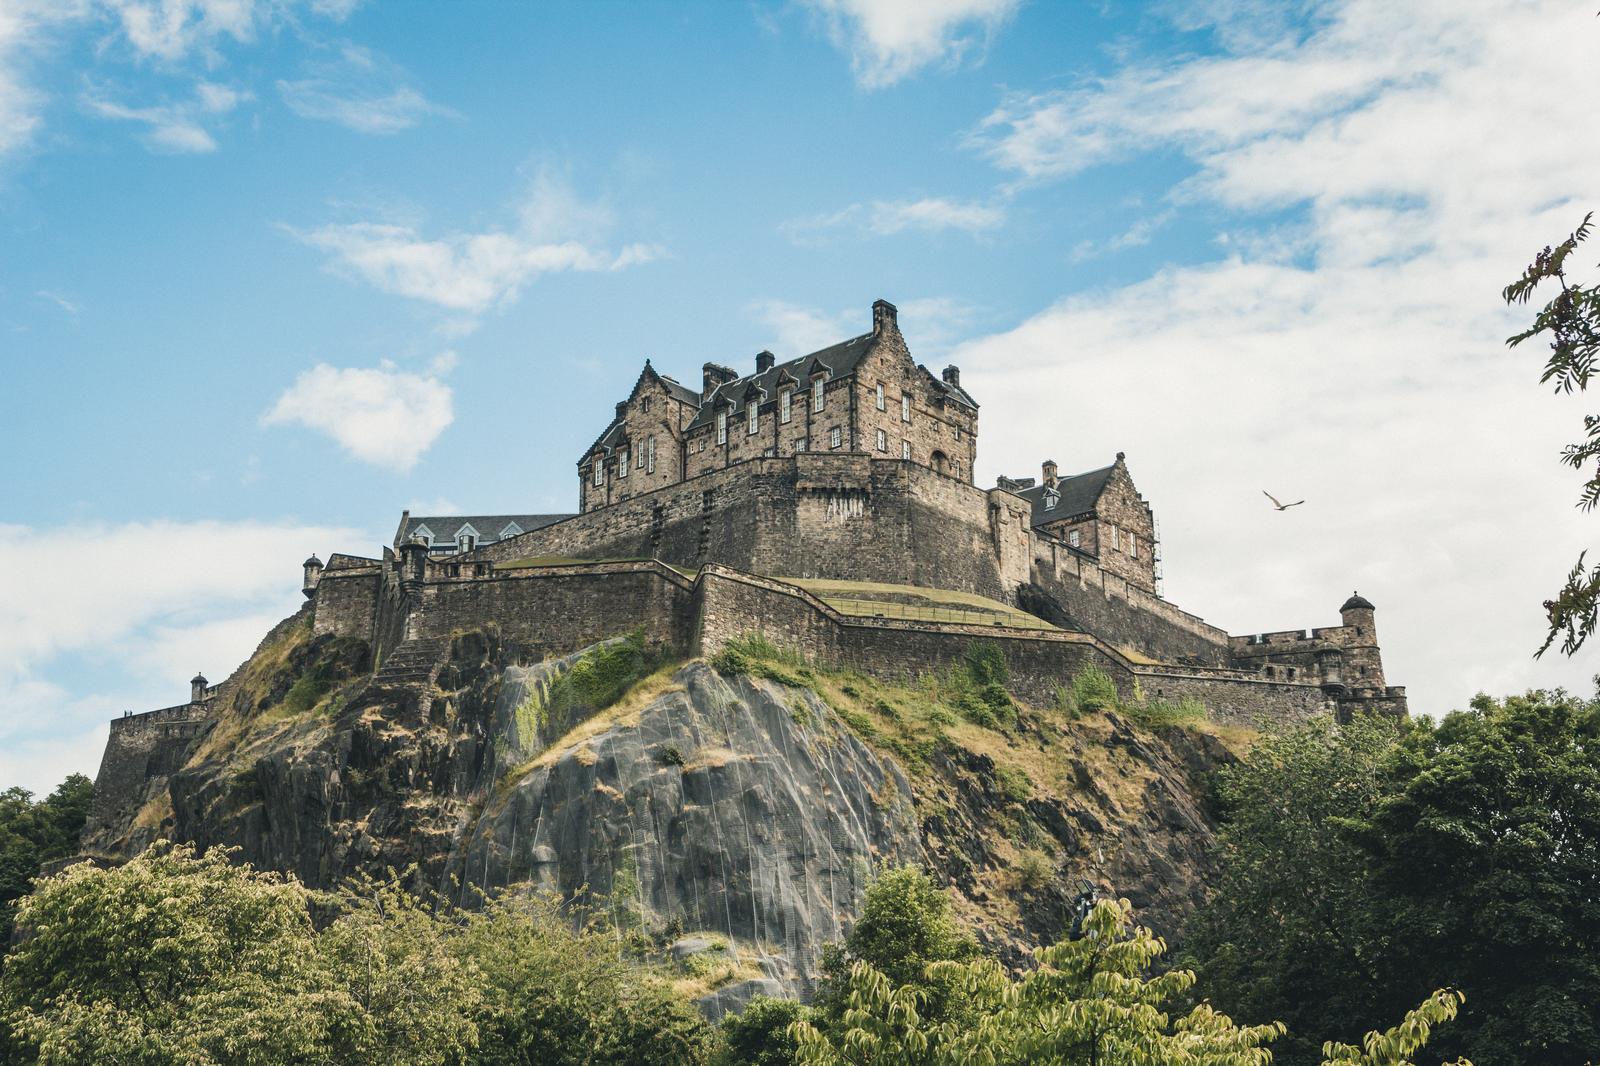 Are These Places In The US Or The UK Quiz Edinburgh Castle, Scotland